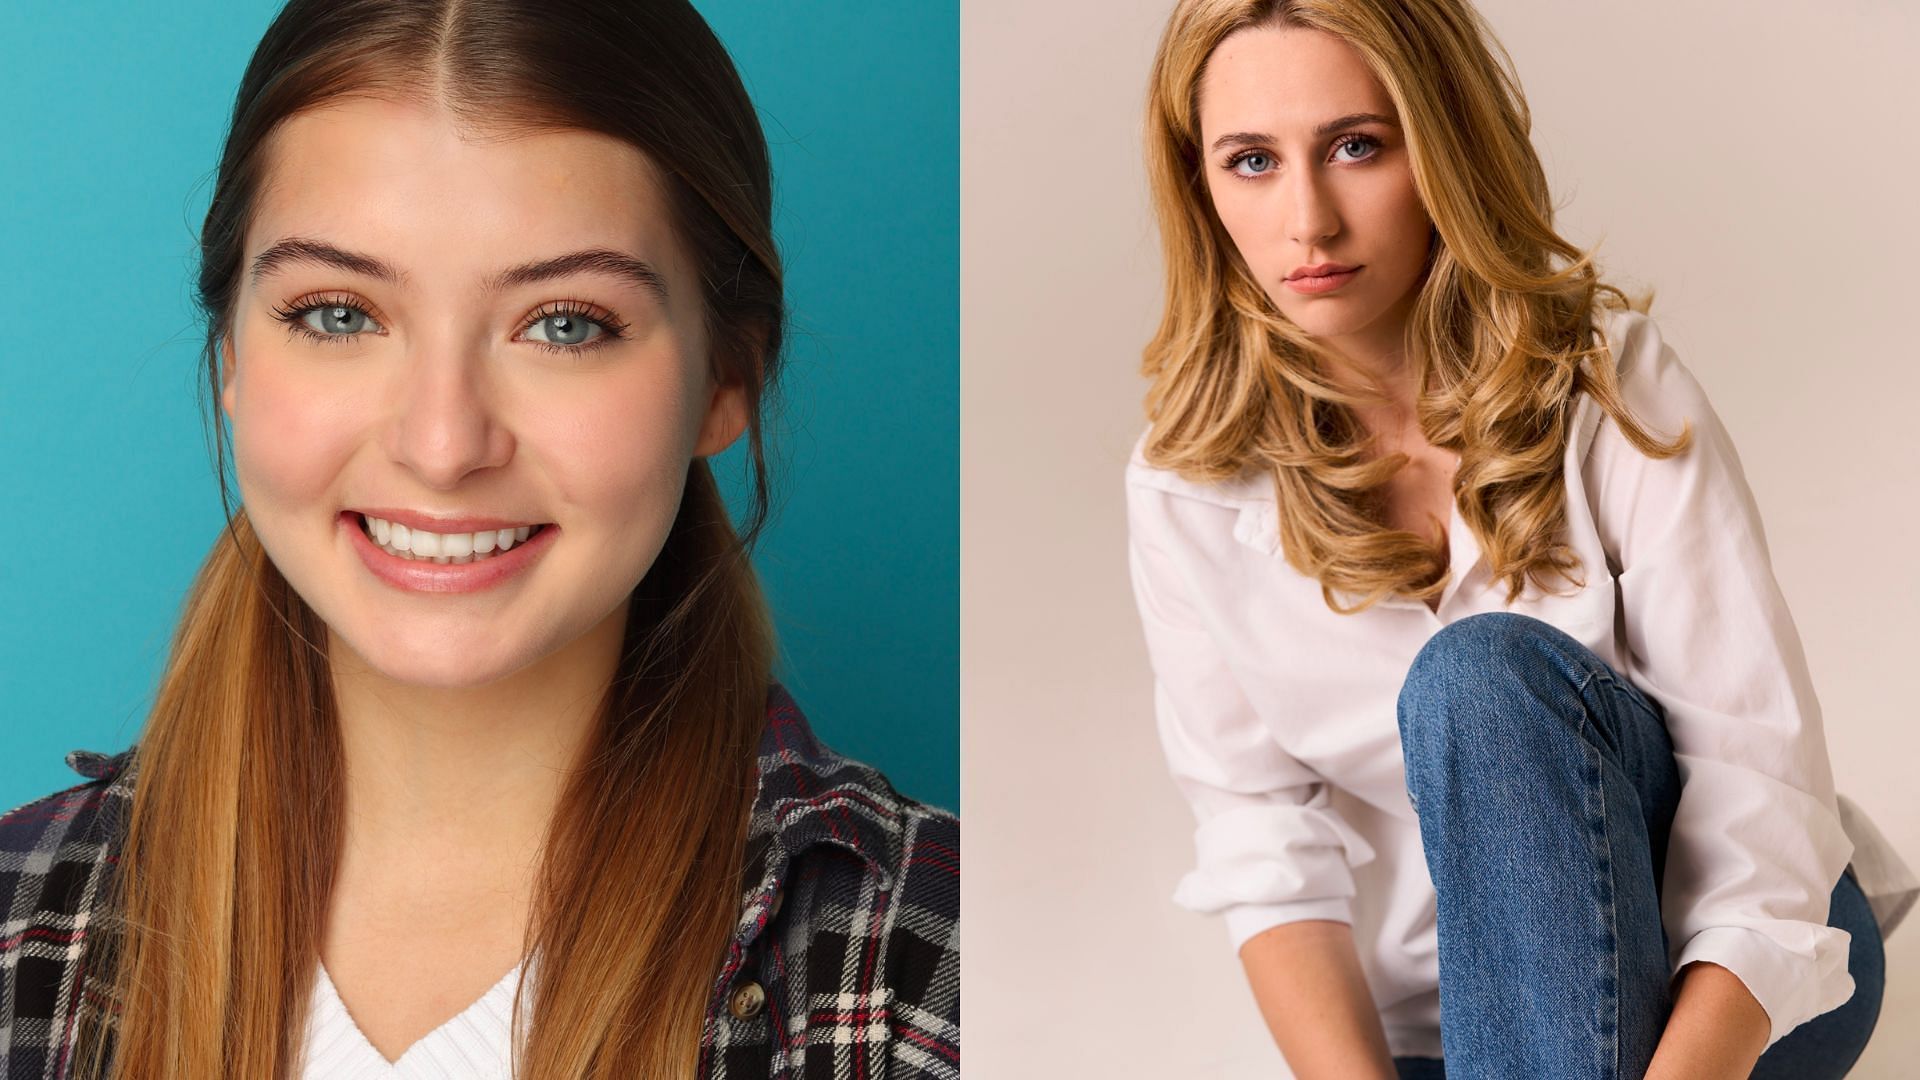 (L) Courtney Fulk has temporarily replaced (R) Eden McCoy in General Hospital (Images via IMDb)